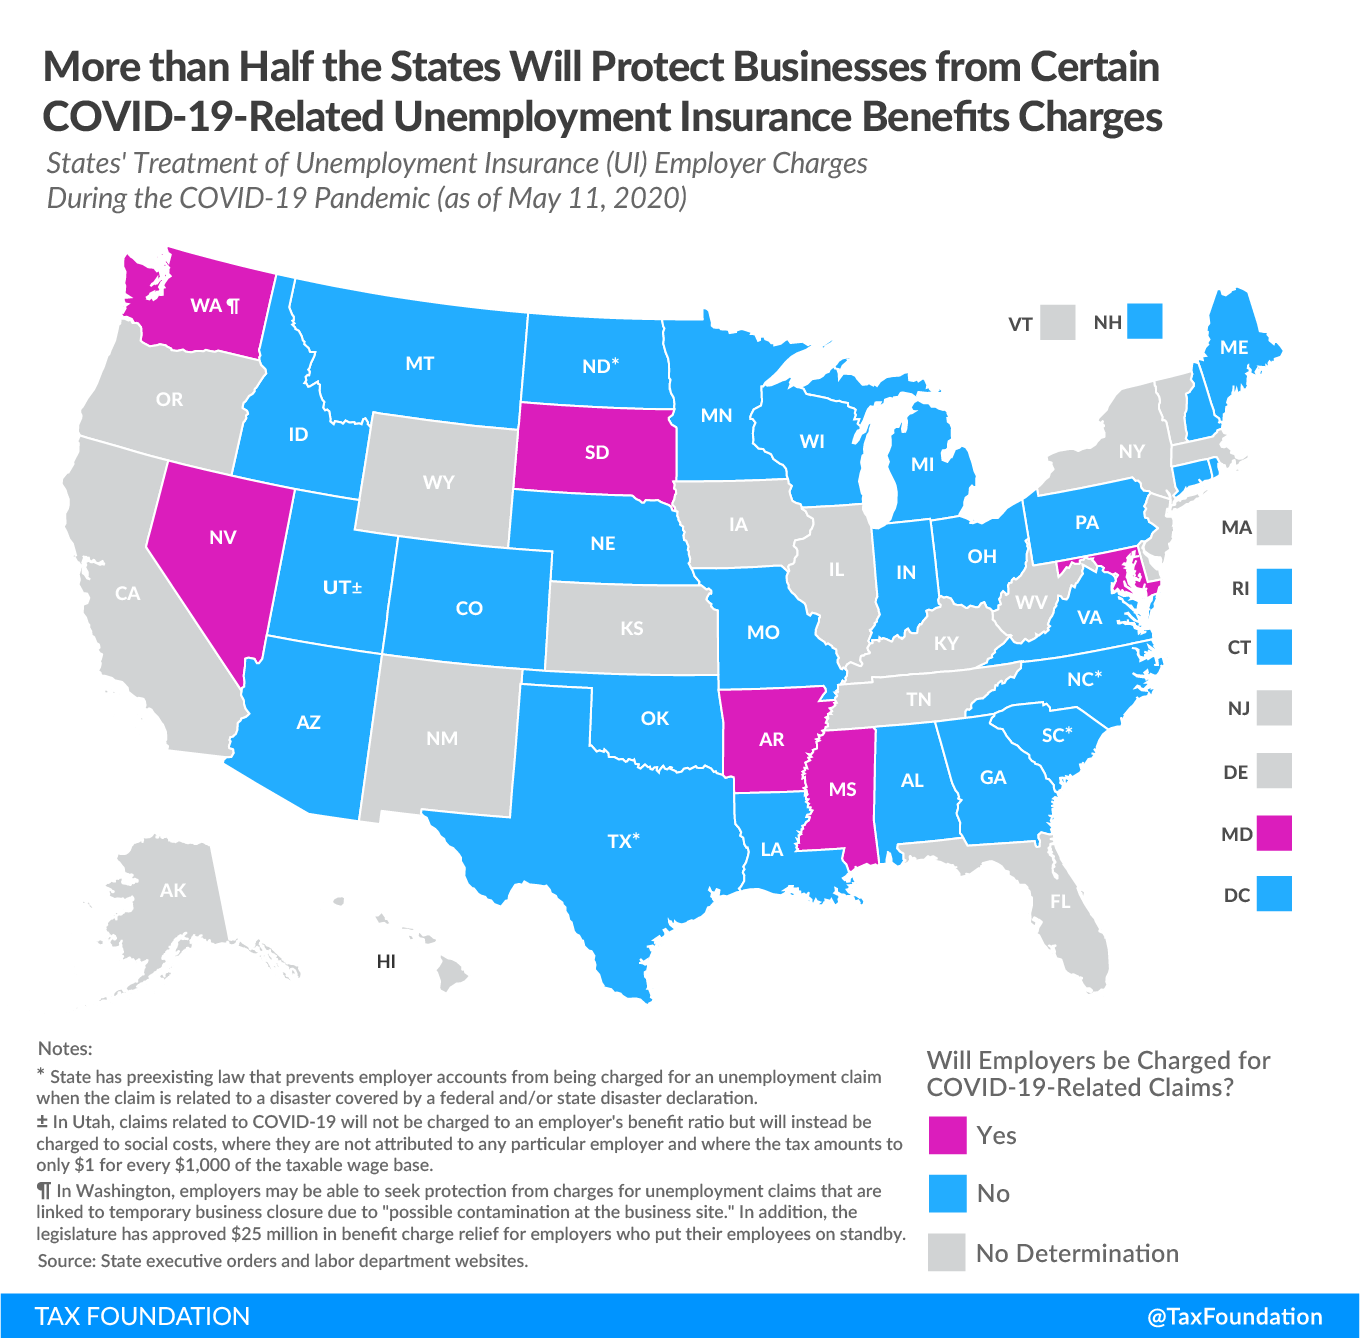 More Than Half the States Will Protect Businesses from Certain COVID-19-Related Unemployment Insurance Tax Hikes. Will employers be charged for COVID-19 related unemployment insurance claims? unemployment insurance tax hikes, unemployment insurance tax rates, UI tax rates, UI benefits, UI trust fund